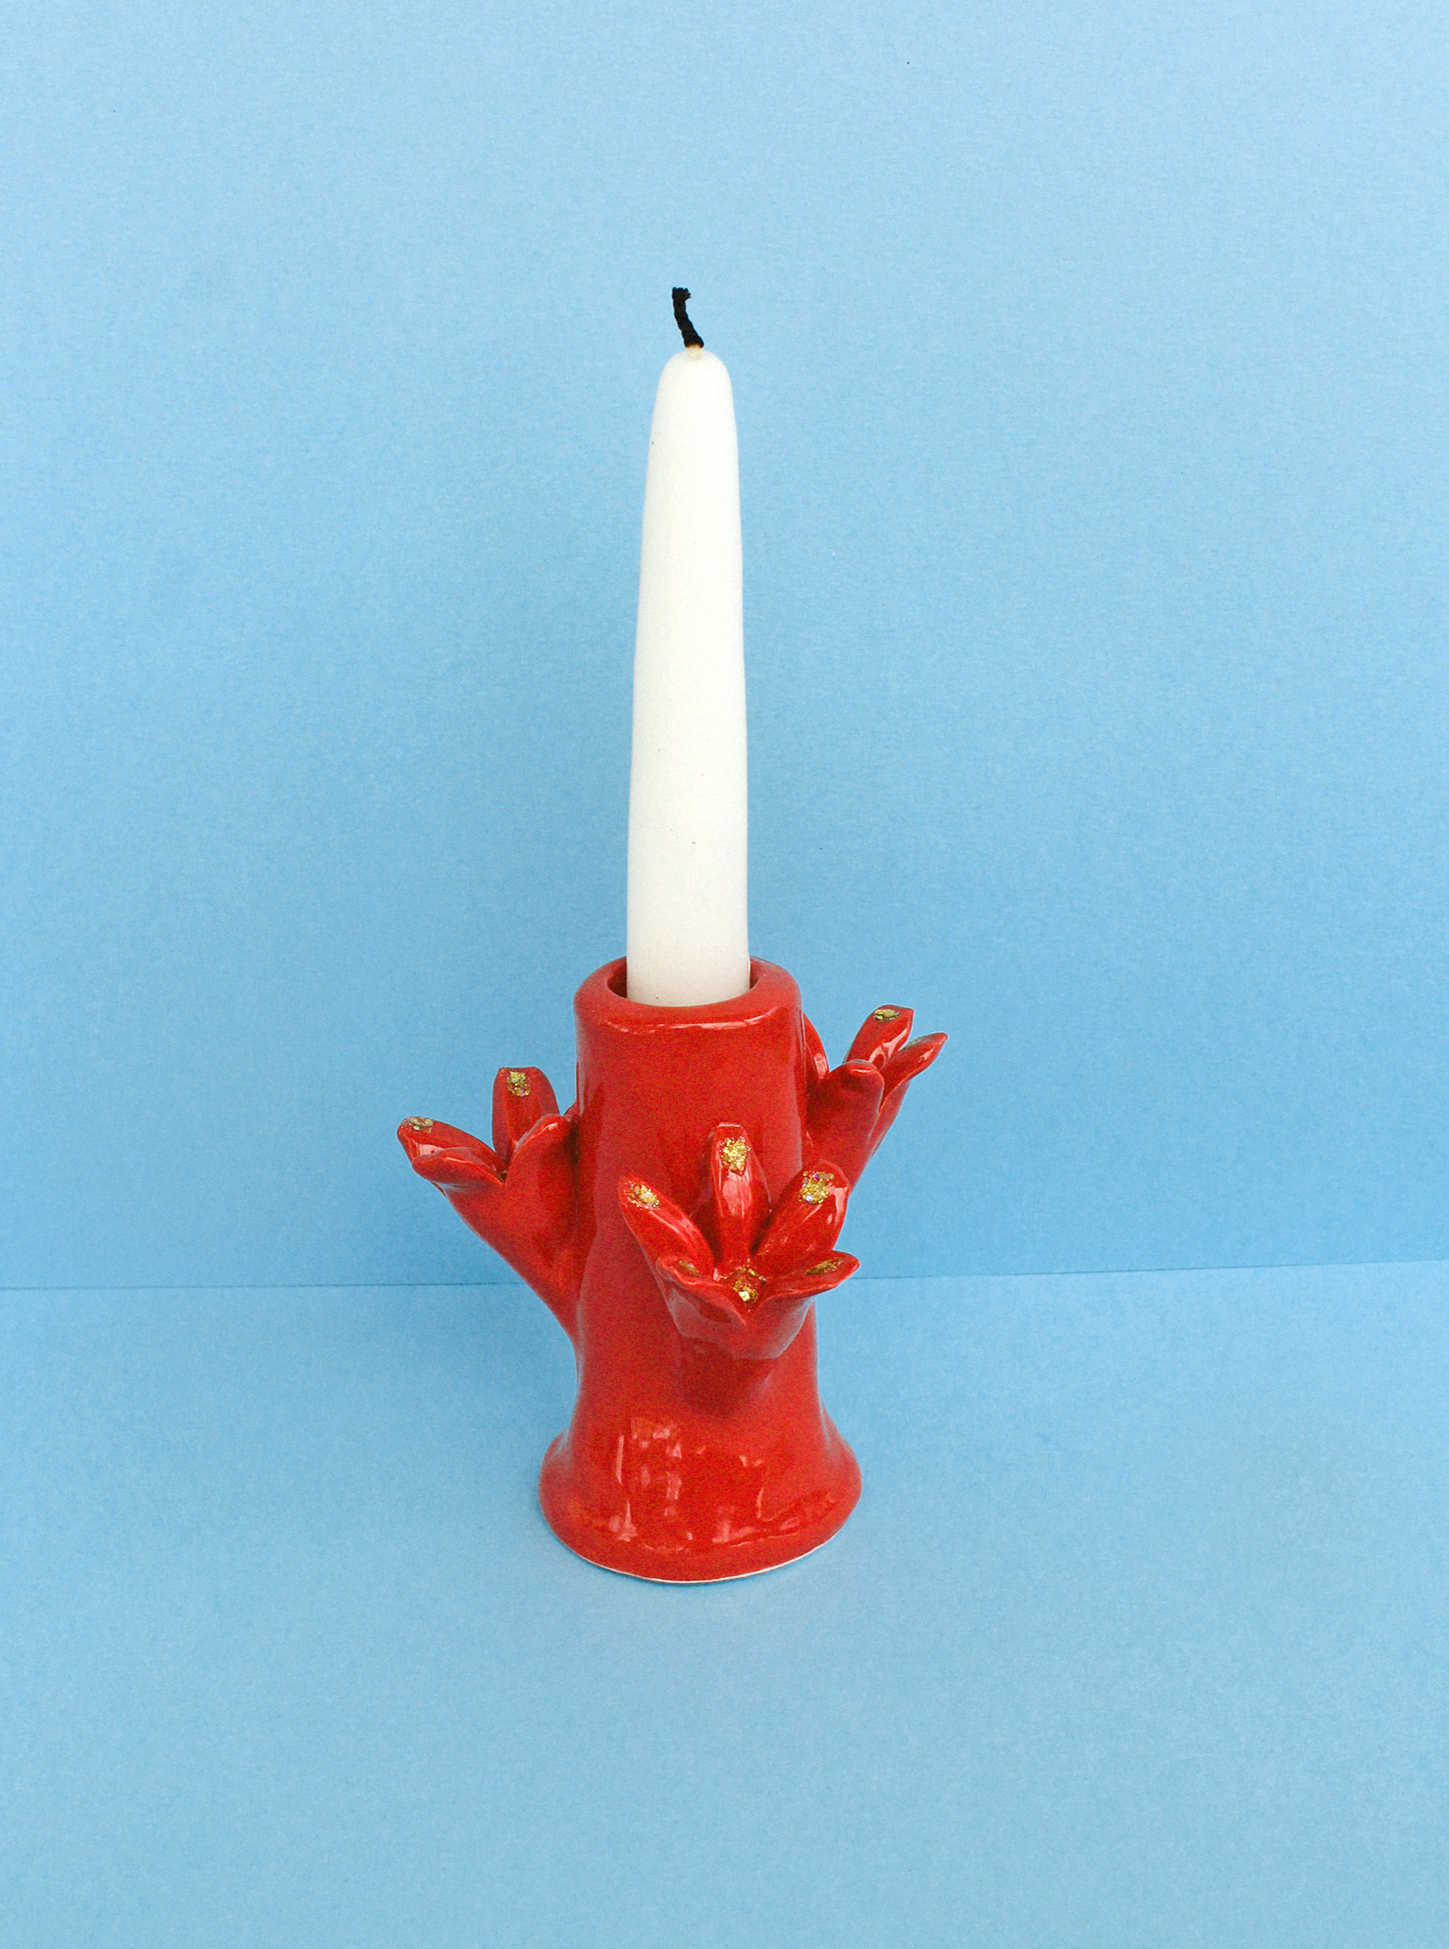 A white candle stands in a Flores Candleholder Set - Rojo by Casa Veronica, set with a hand design, against a plain blue background. The fingers of the holder are adorned with golden details.